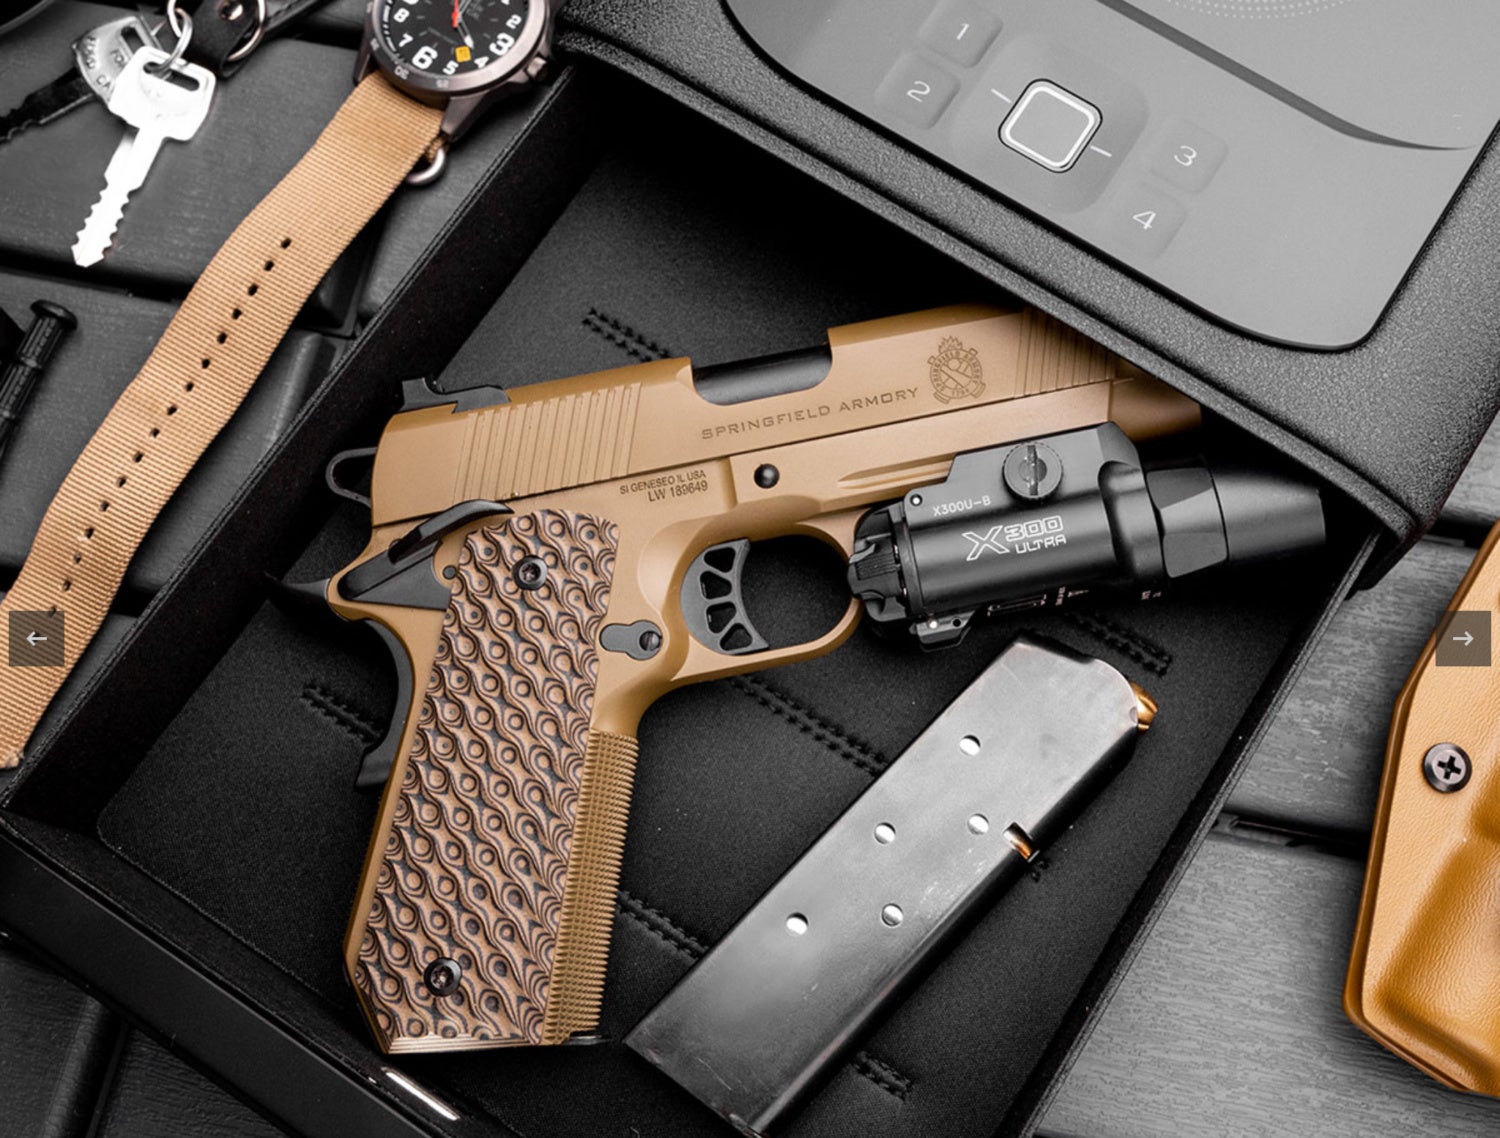 Springfield Armory Reveals Innovative Features in New TRP Pistol Series